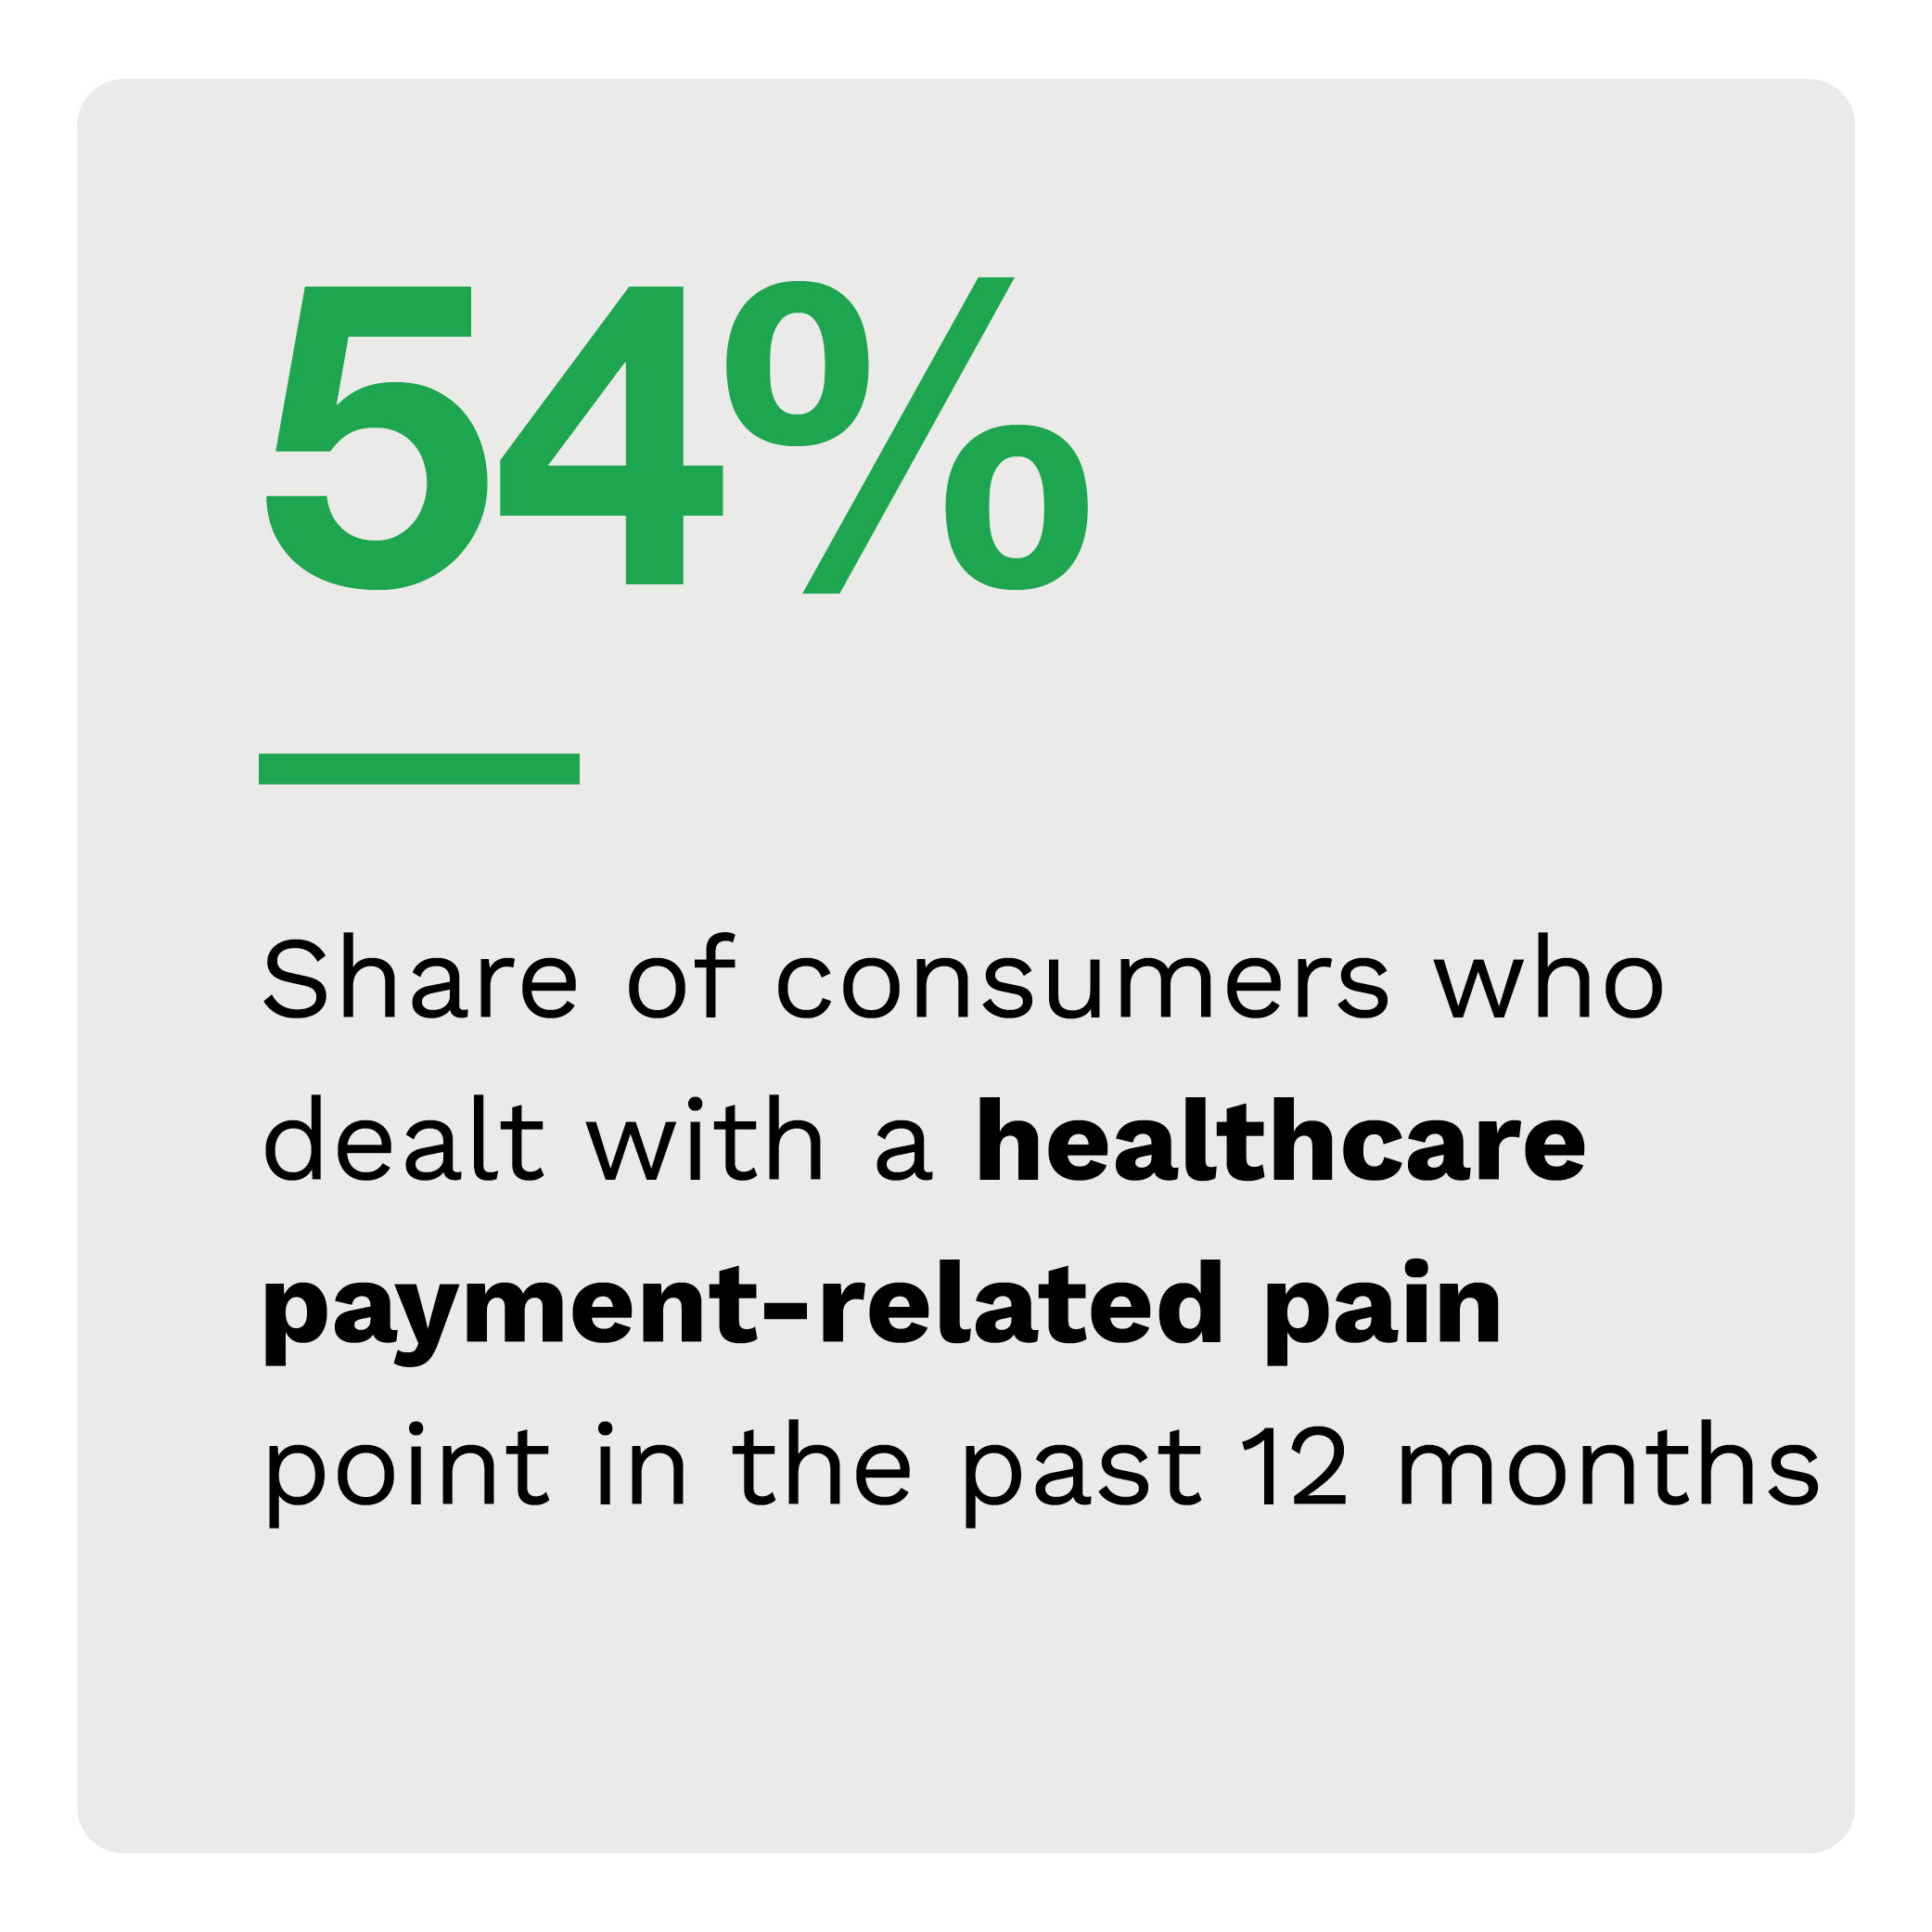 54%: Share of consumers who dealt with a healthcare payment-related pain point in the past 12 months